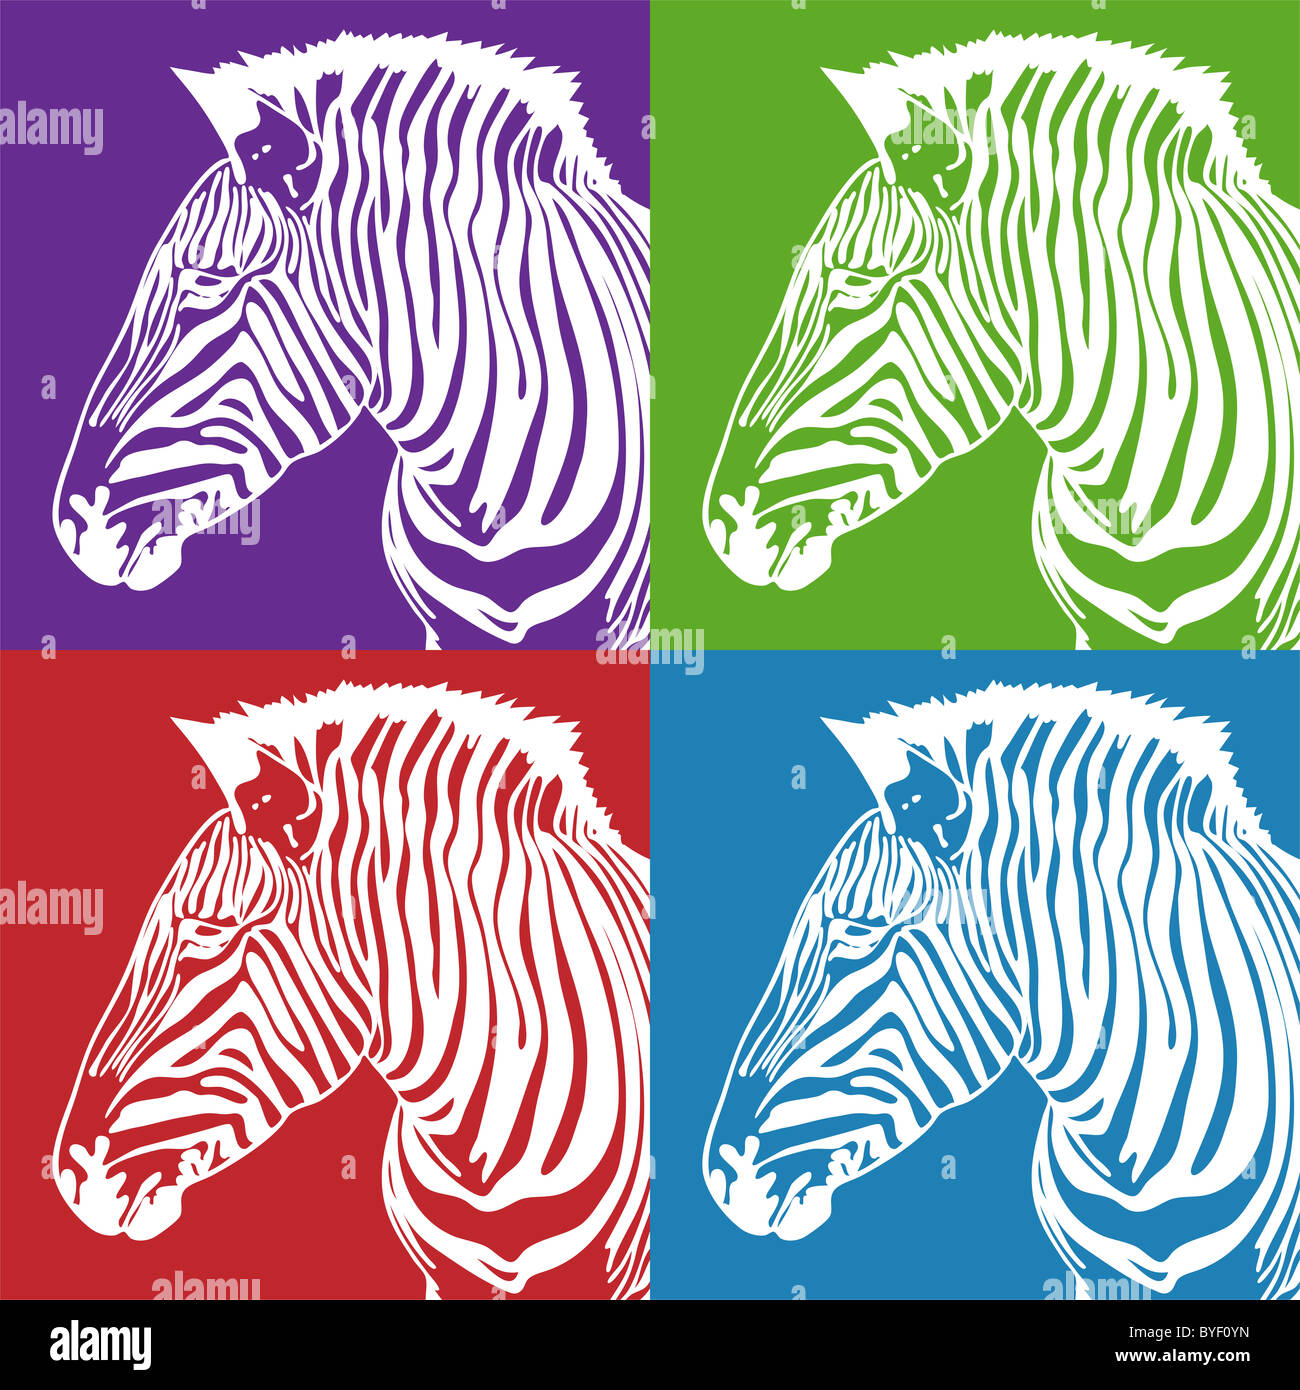 Zebra in white ink on four colored squares. Stock Photo